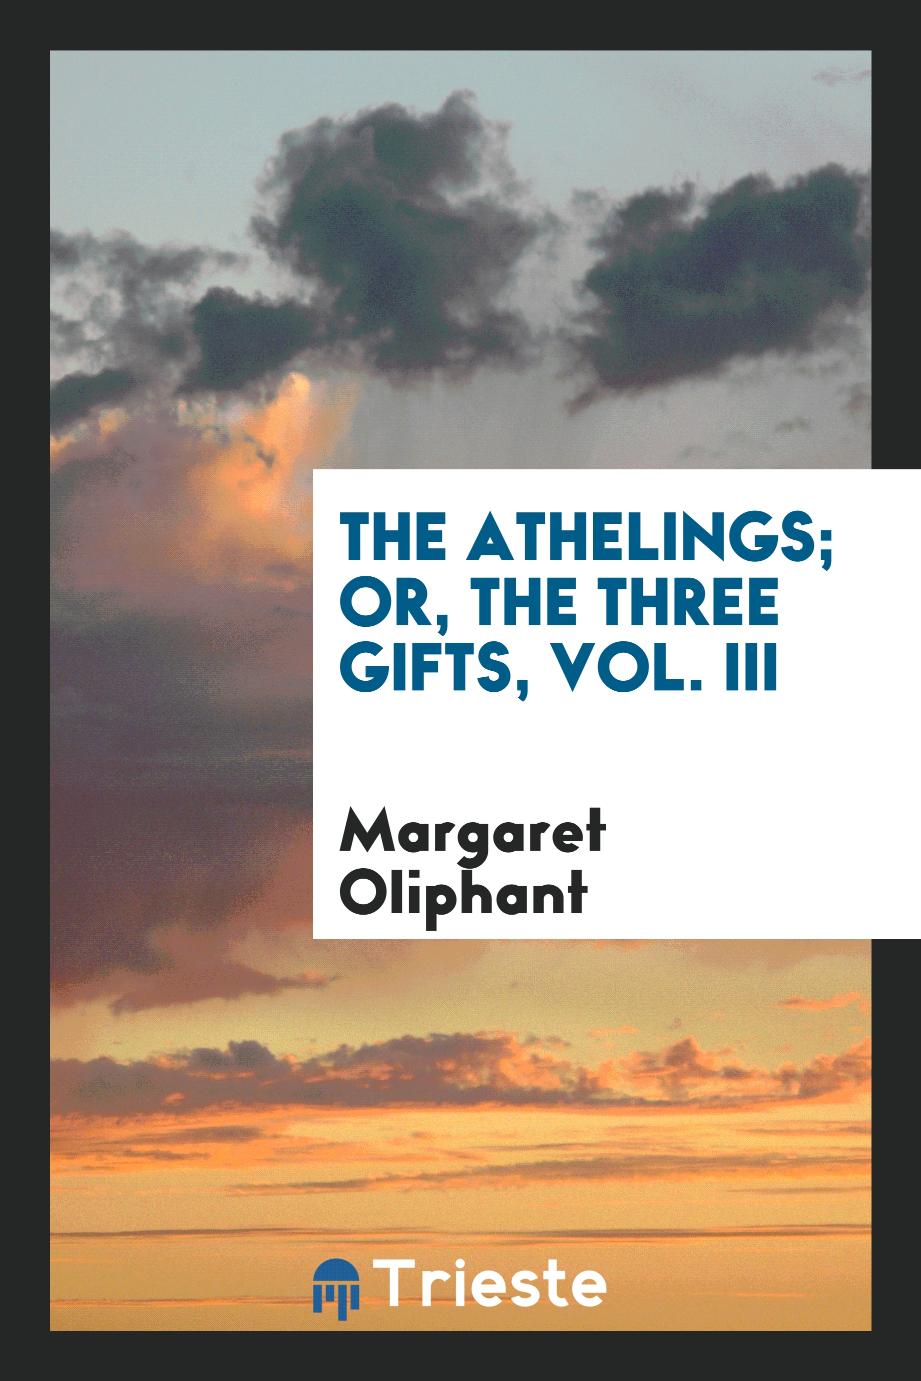 Margaret Oliphant - The Athelings; or, The three gifts, Vol. III